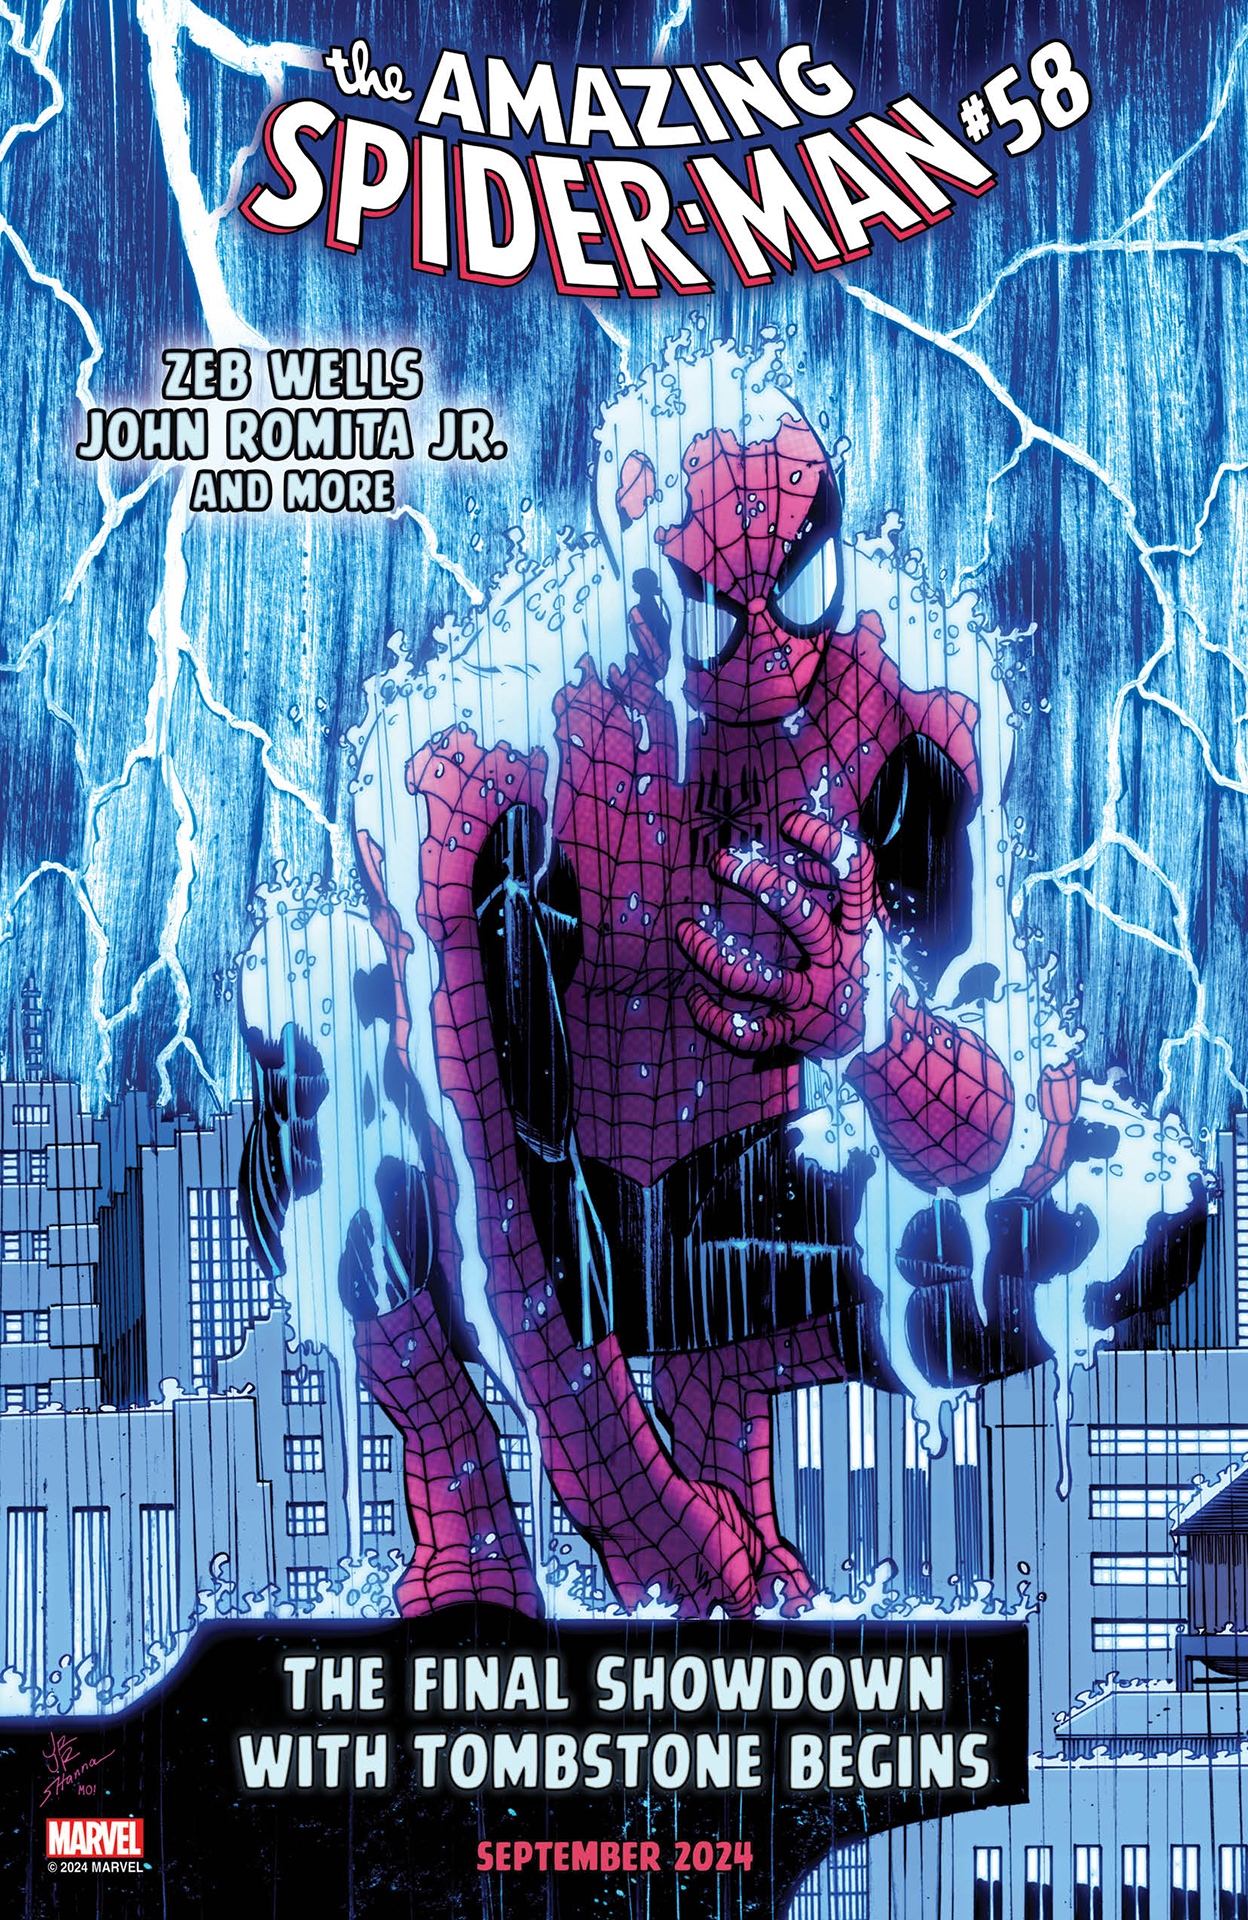 Marvel Comics FINALLY Announces The End Of Zeb Wells’ Terrible ‘Amazing Spider-Man’ Run